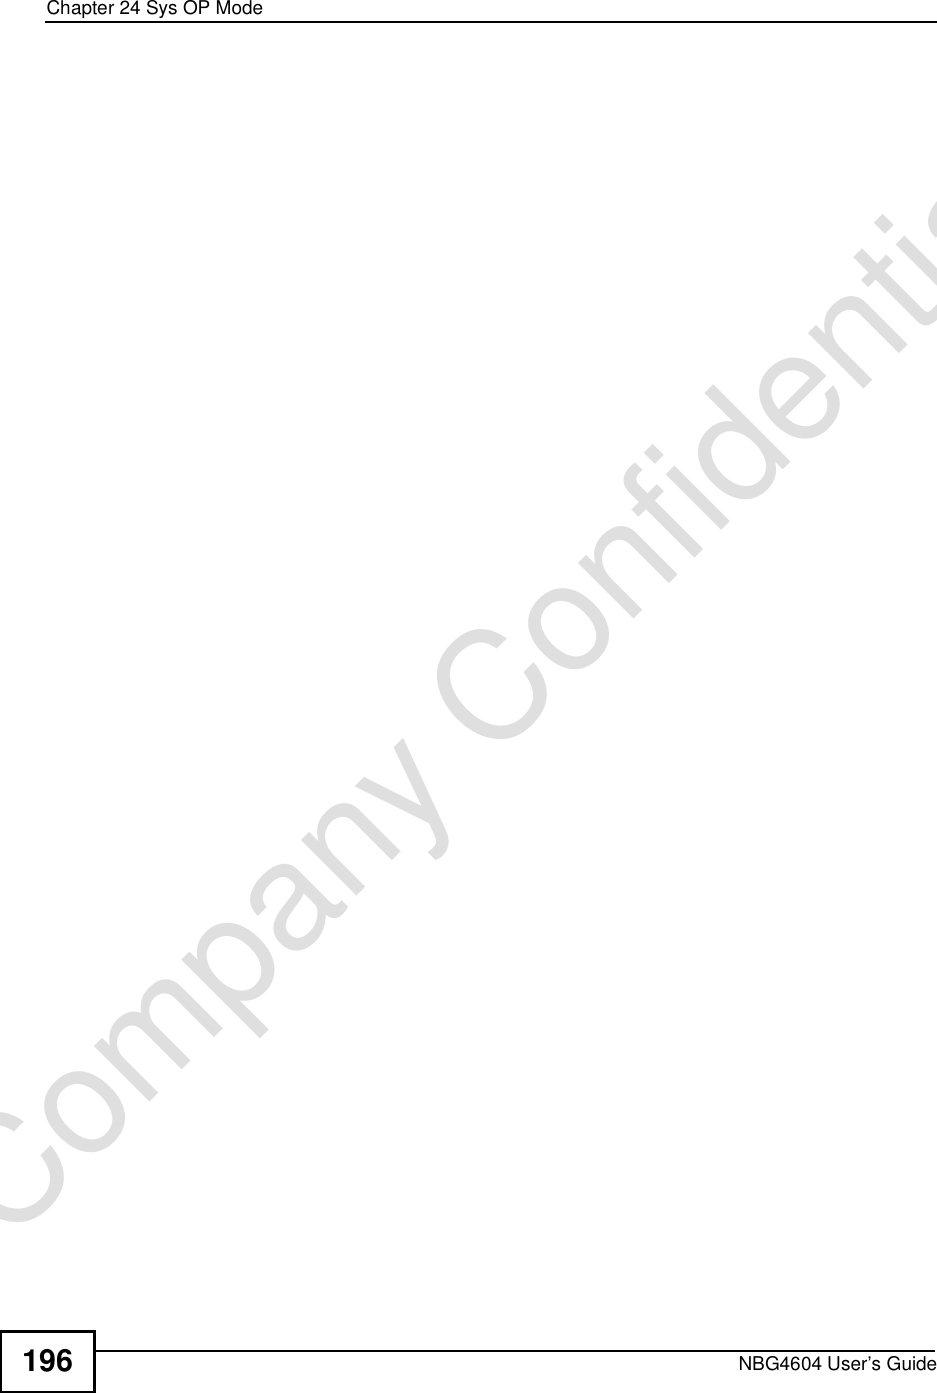 Chapter 24Sys OP ModeNBG4604 User’s Guide196Company Confidential